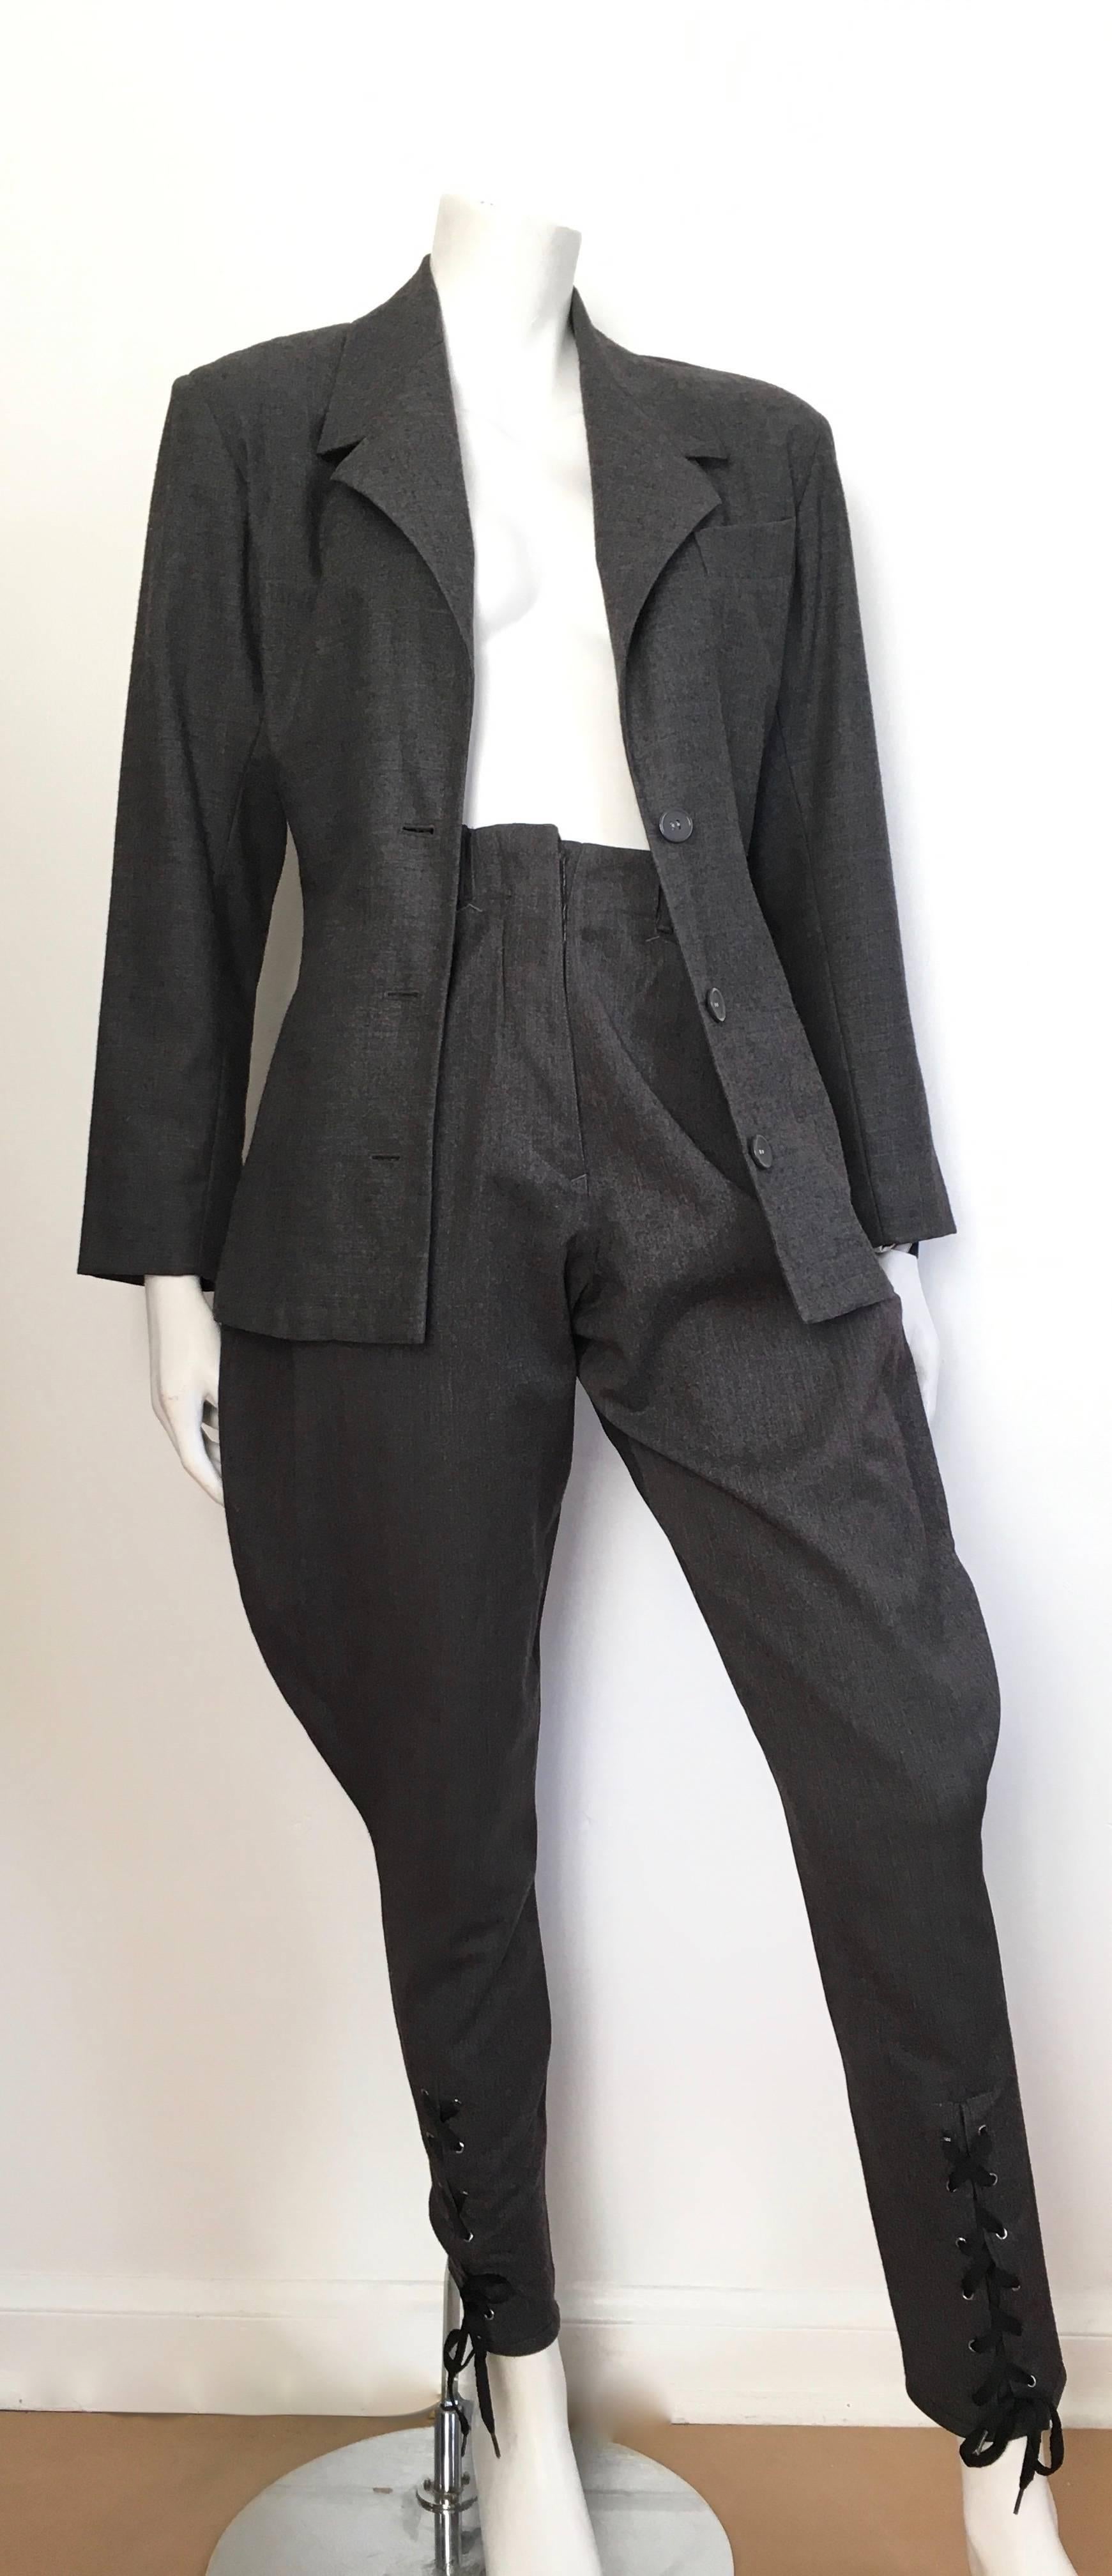 Jean Paul Gaultier 1980s grey wool jacket & lace up jodhpur pants is a size 4. The jacket is sized an Italian size 42 and the pants are size 40. The client who consigned this piece purchased it in Paris back in the 80s and she is a size 4. The waist